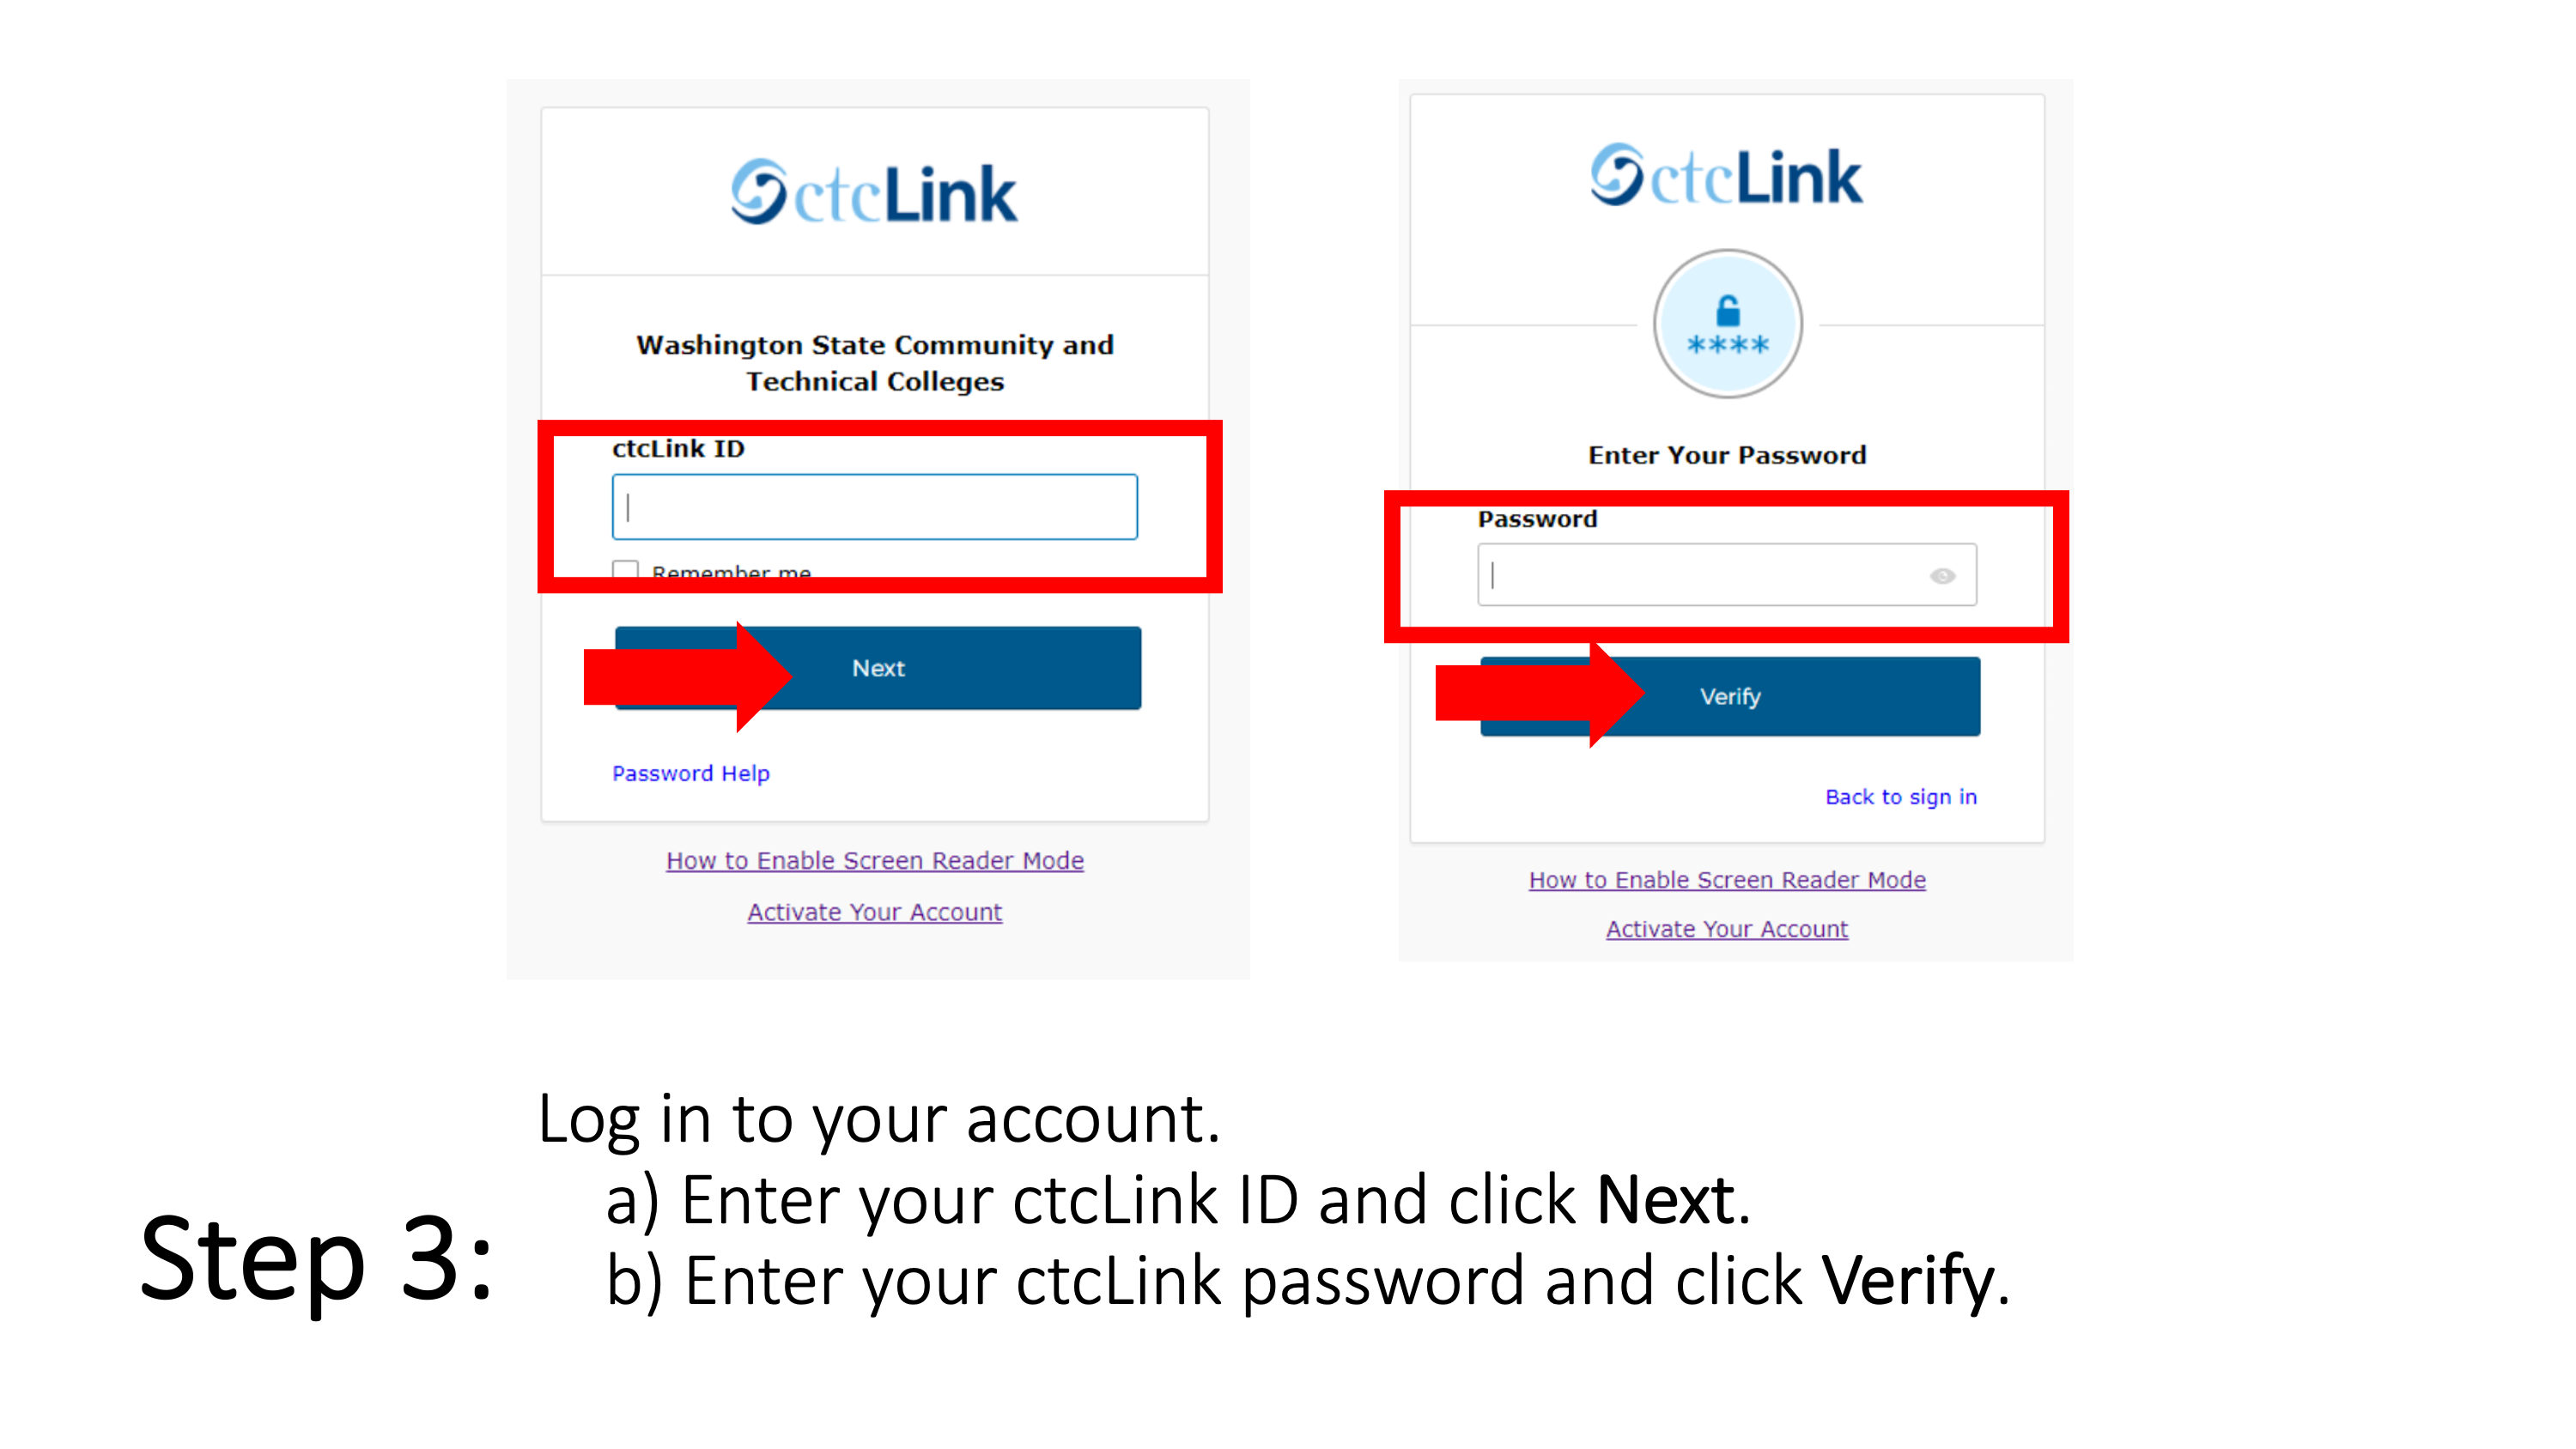 Step 3: Log in to your account. a) Enter your ctcLink ID and click Next. b) Enter your ctcLink password and click Verify.